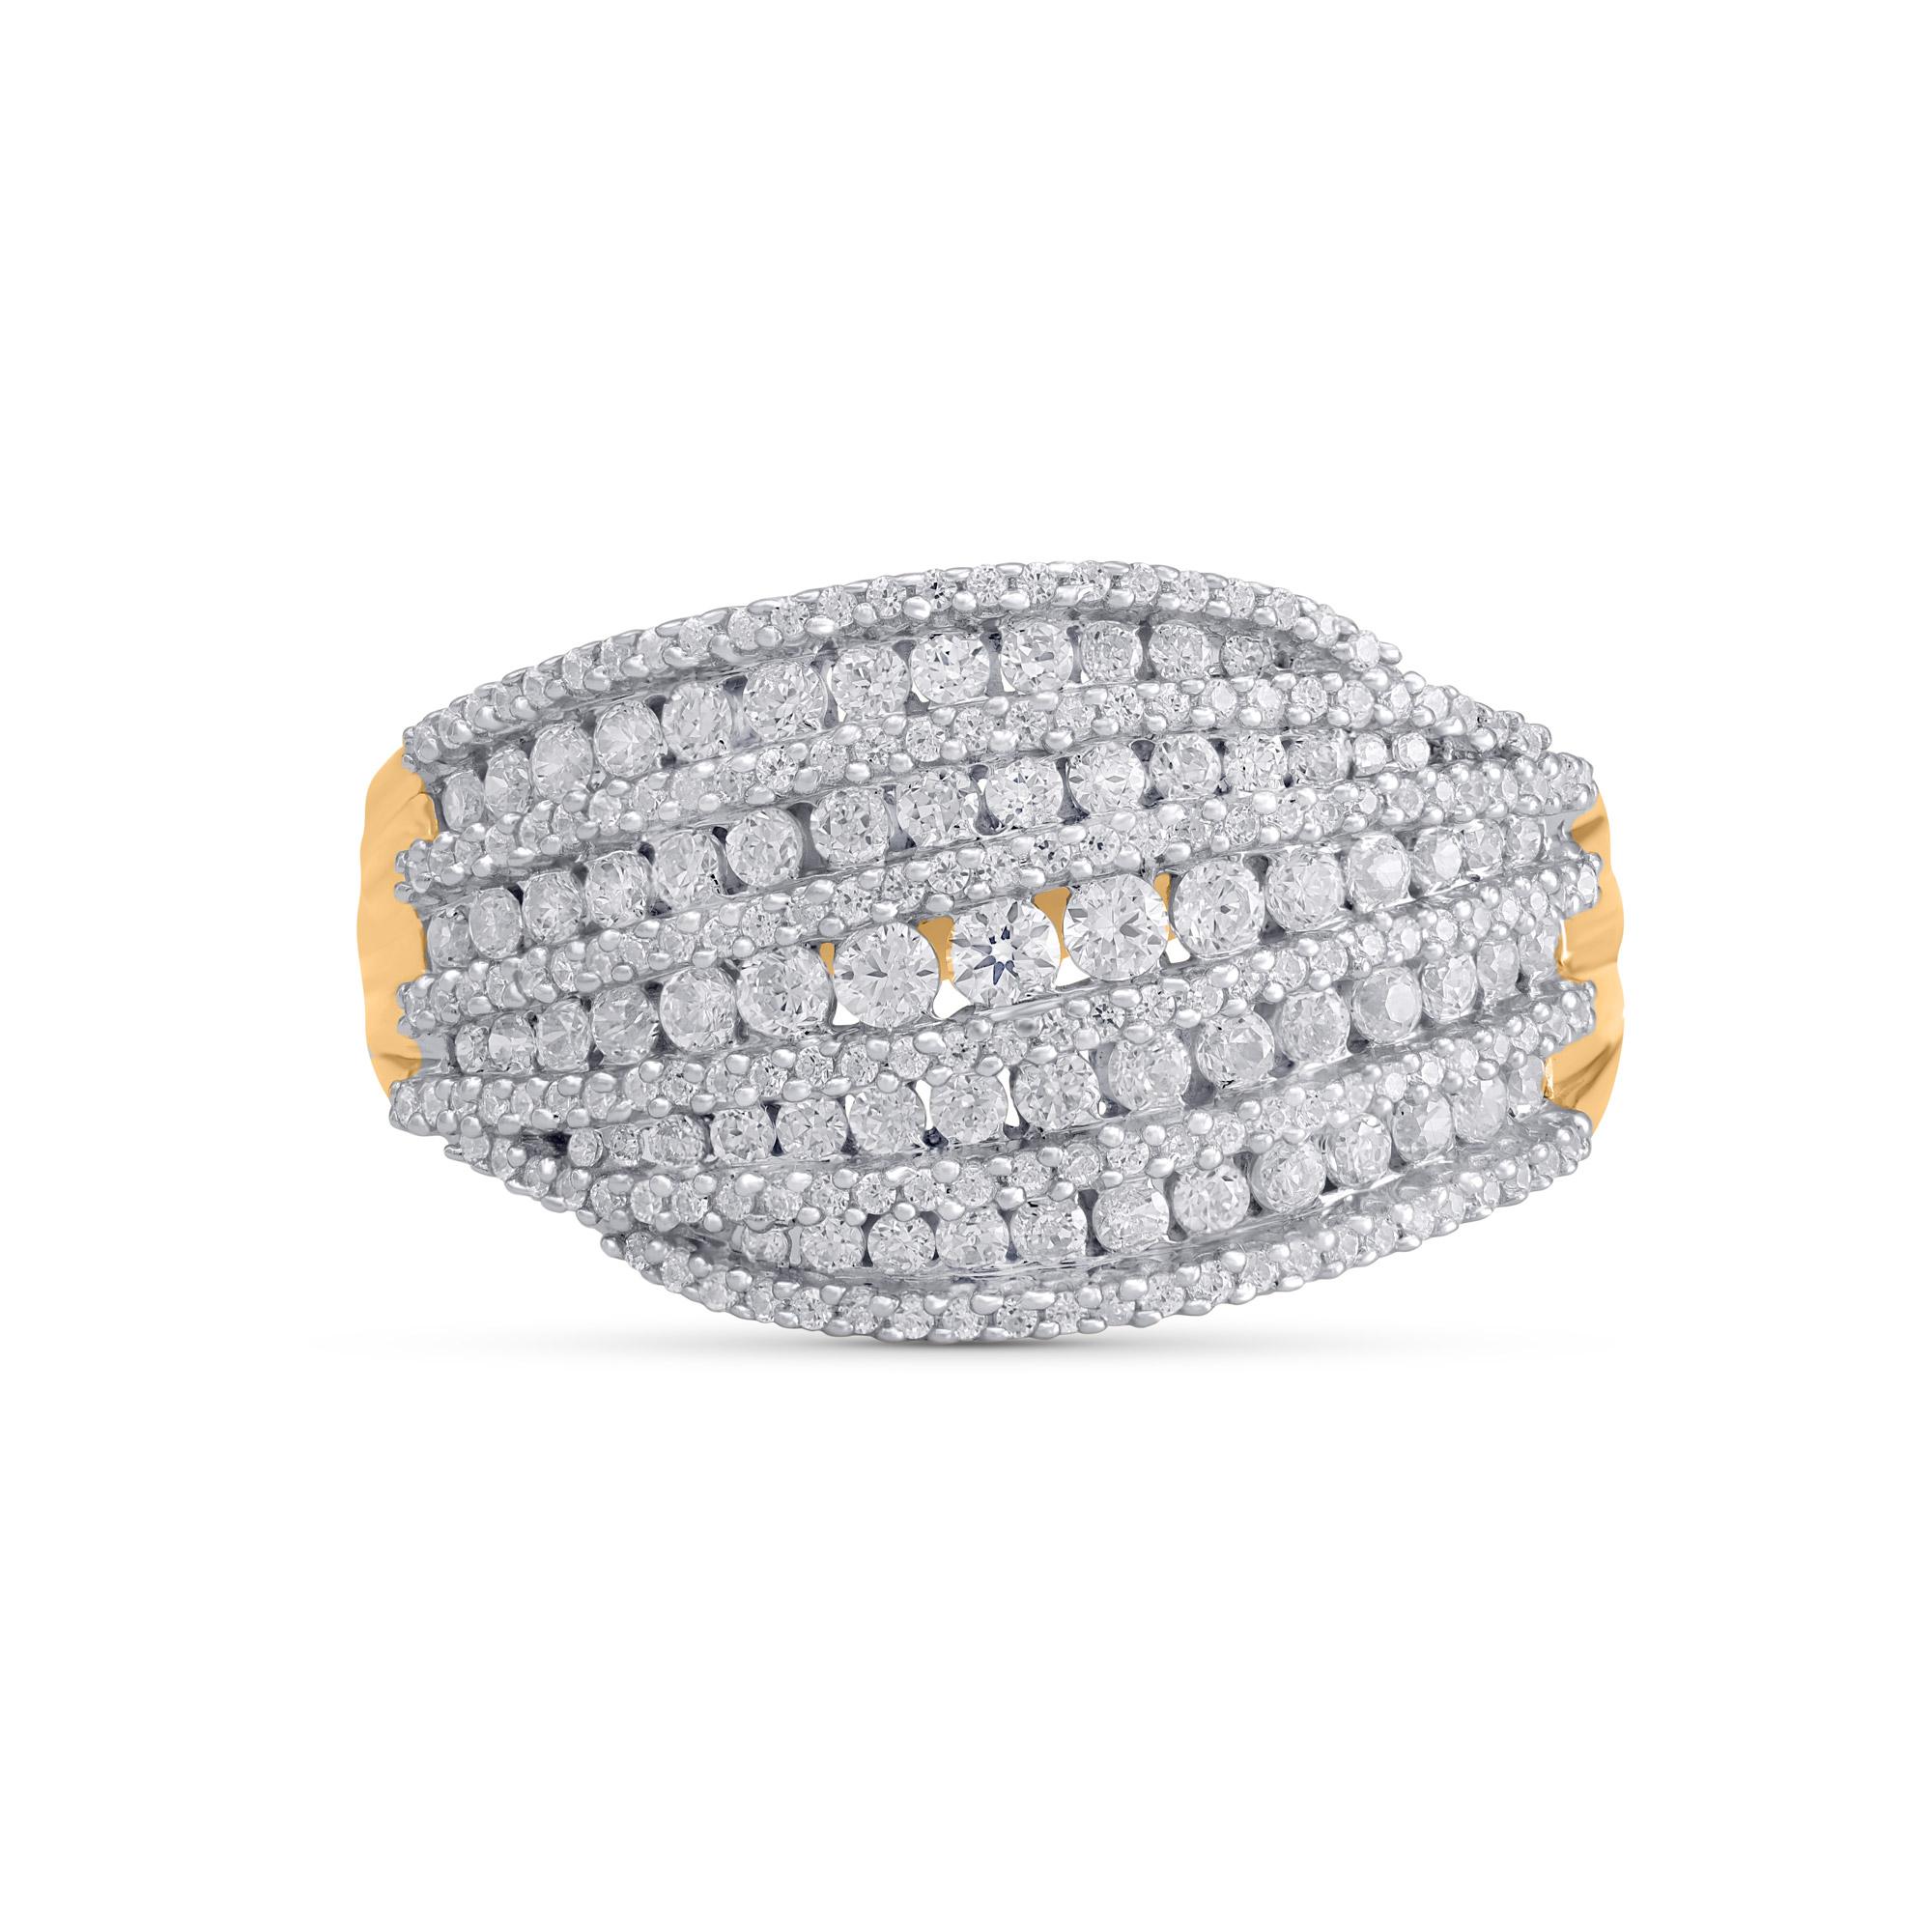 Elegant and Glamorous, this multi row wedding band ring is perfect for your evening ensemble. The ring is crafted from 14 karat gold in your choice of white, rose, or yellow, and features 233 round single and brilliant cut diamond set in prong &